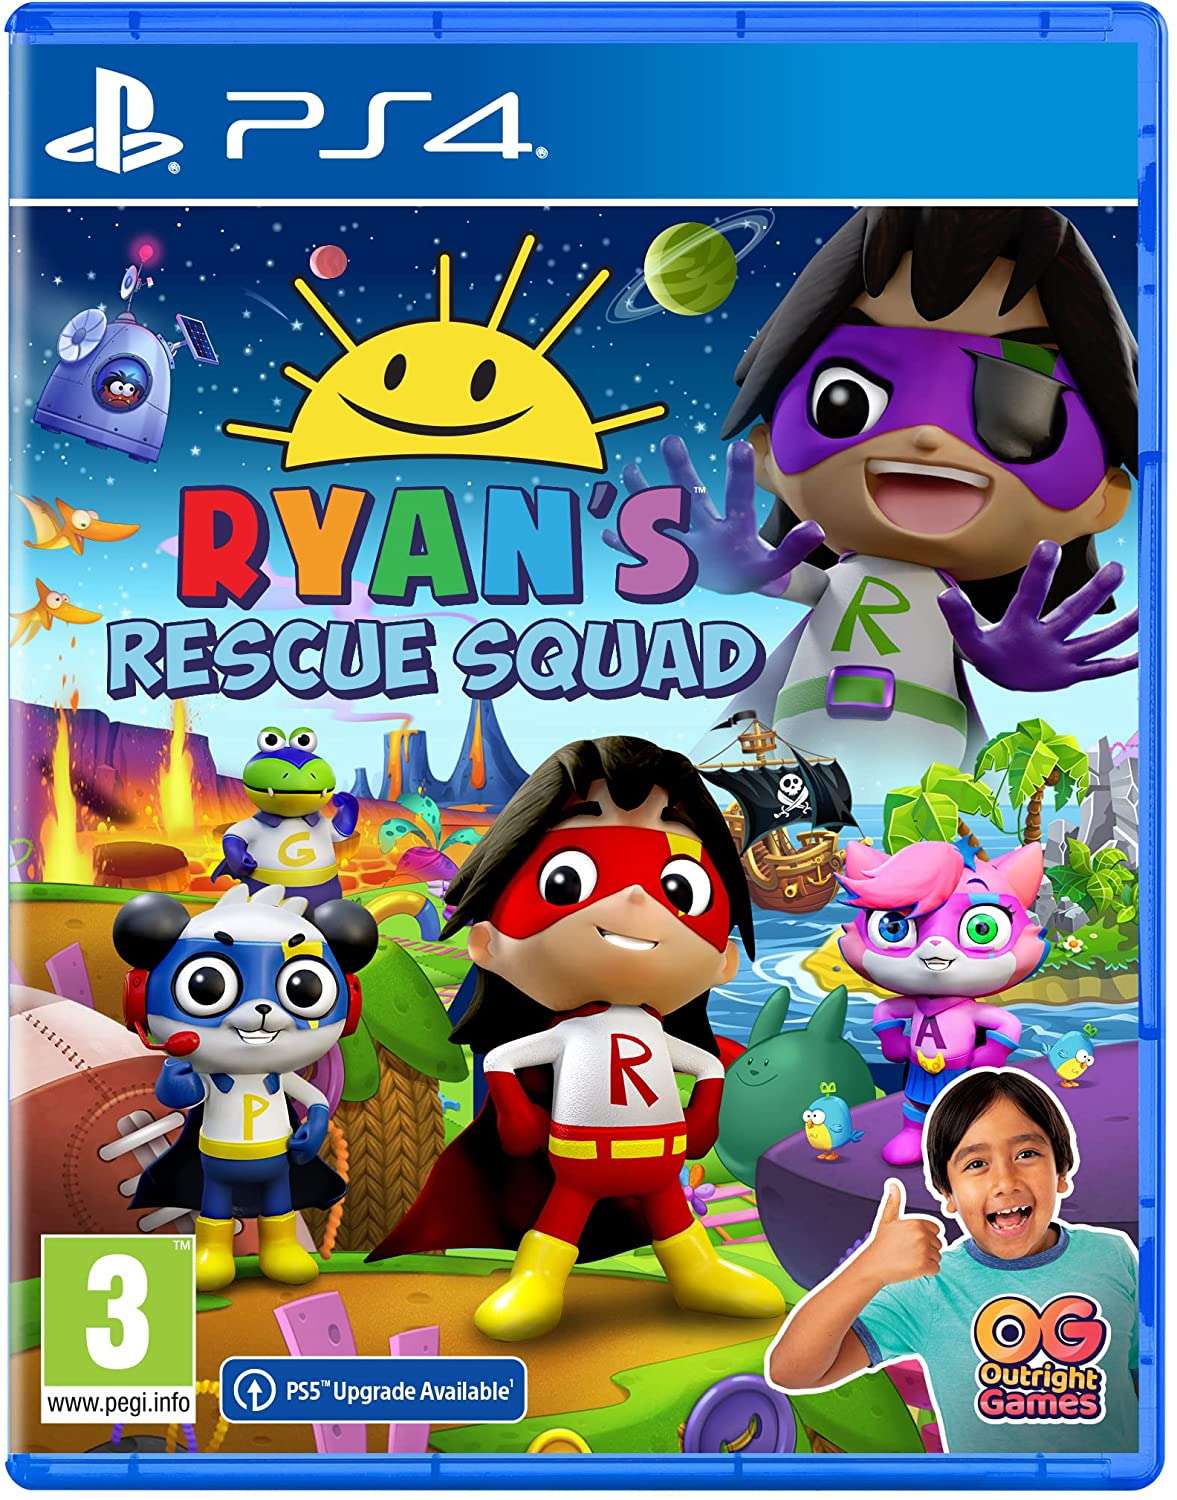 Ryans Rescue Squad for PS4 to buy